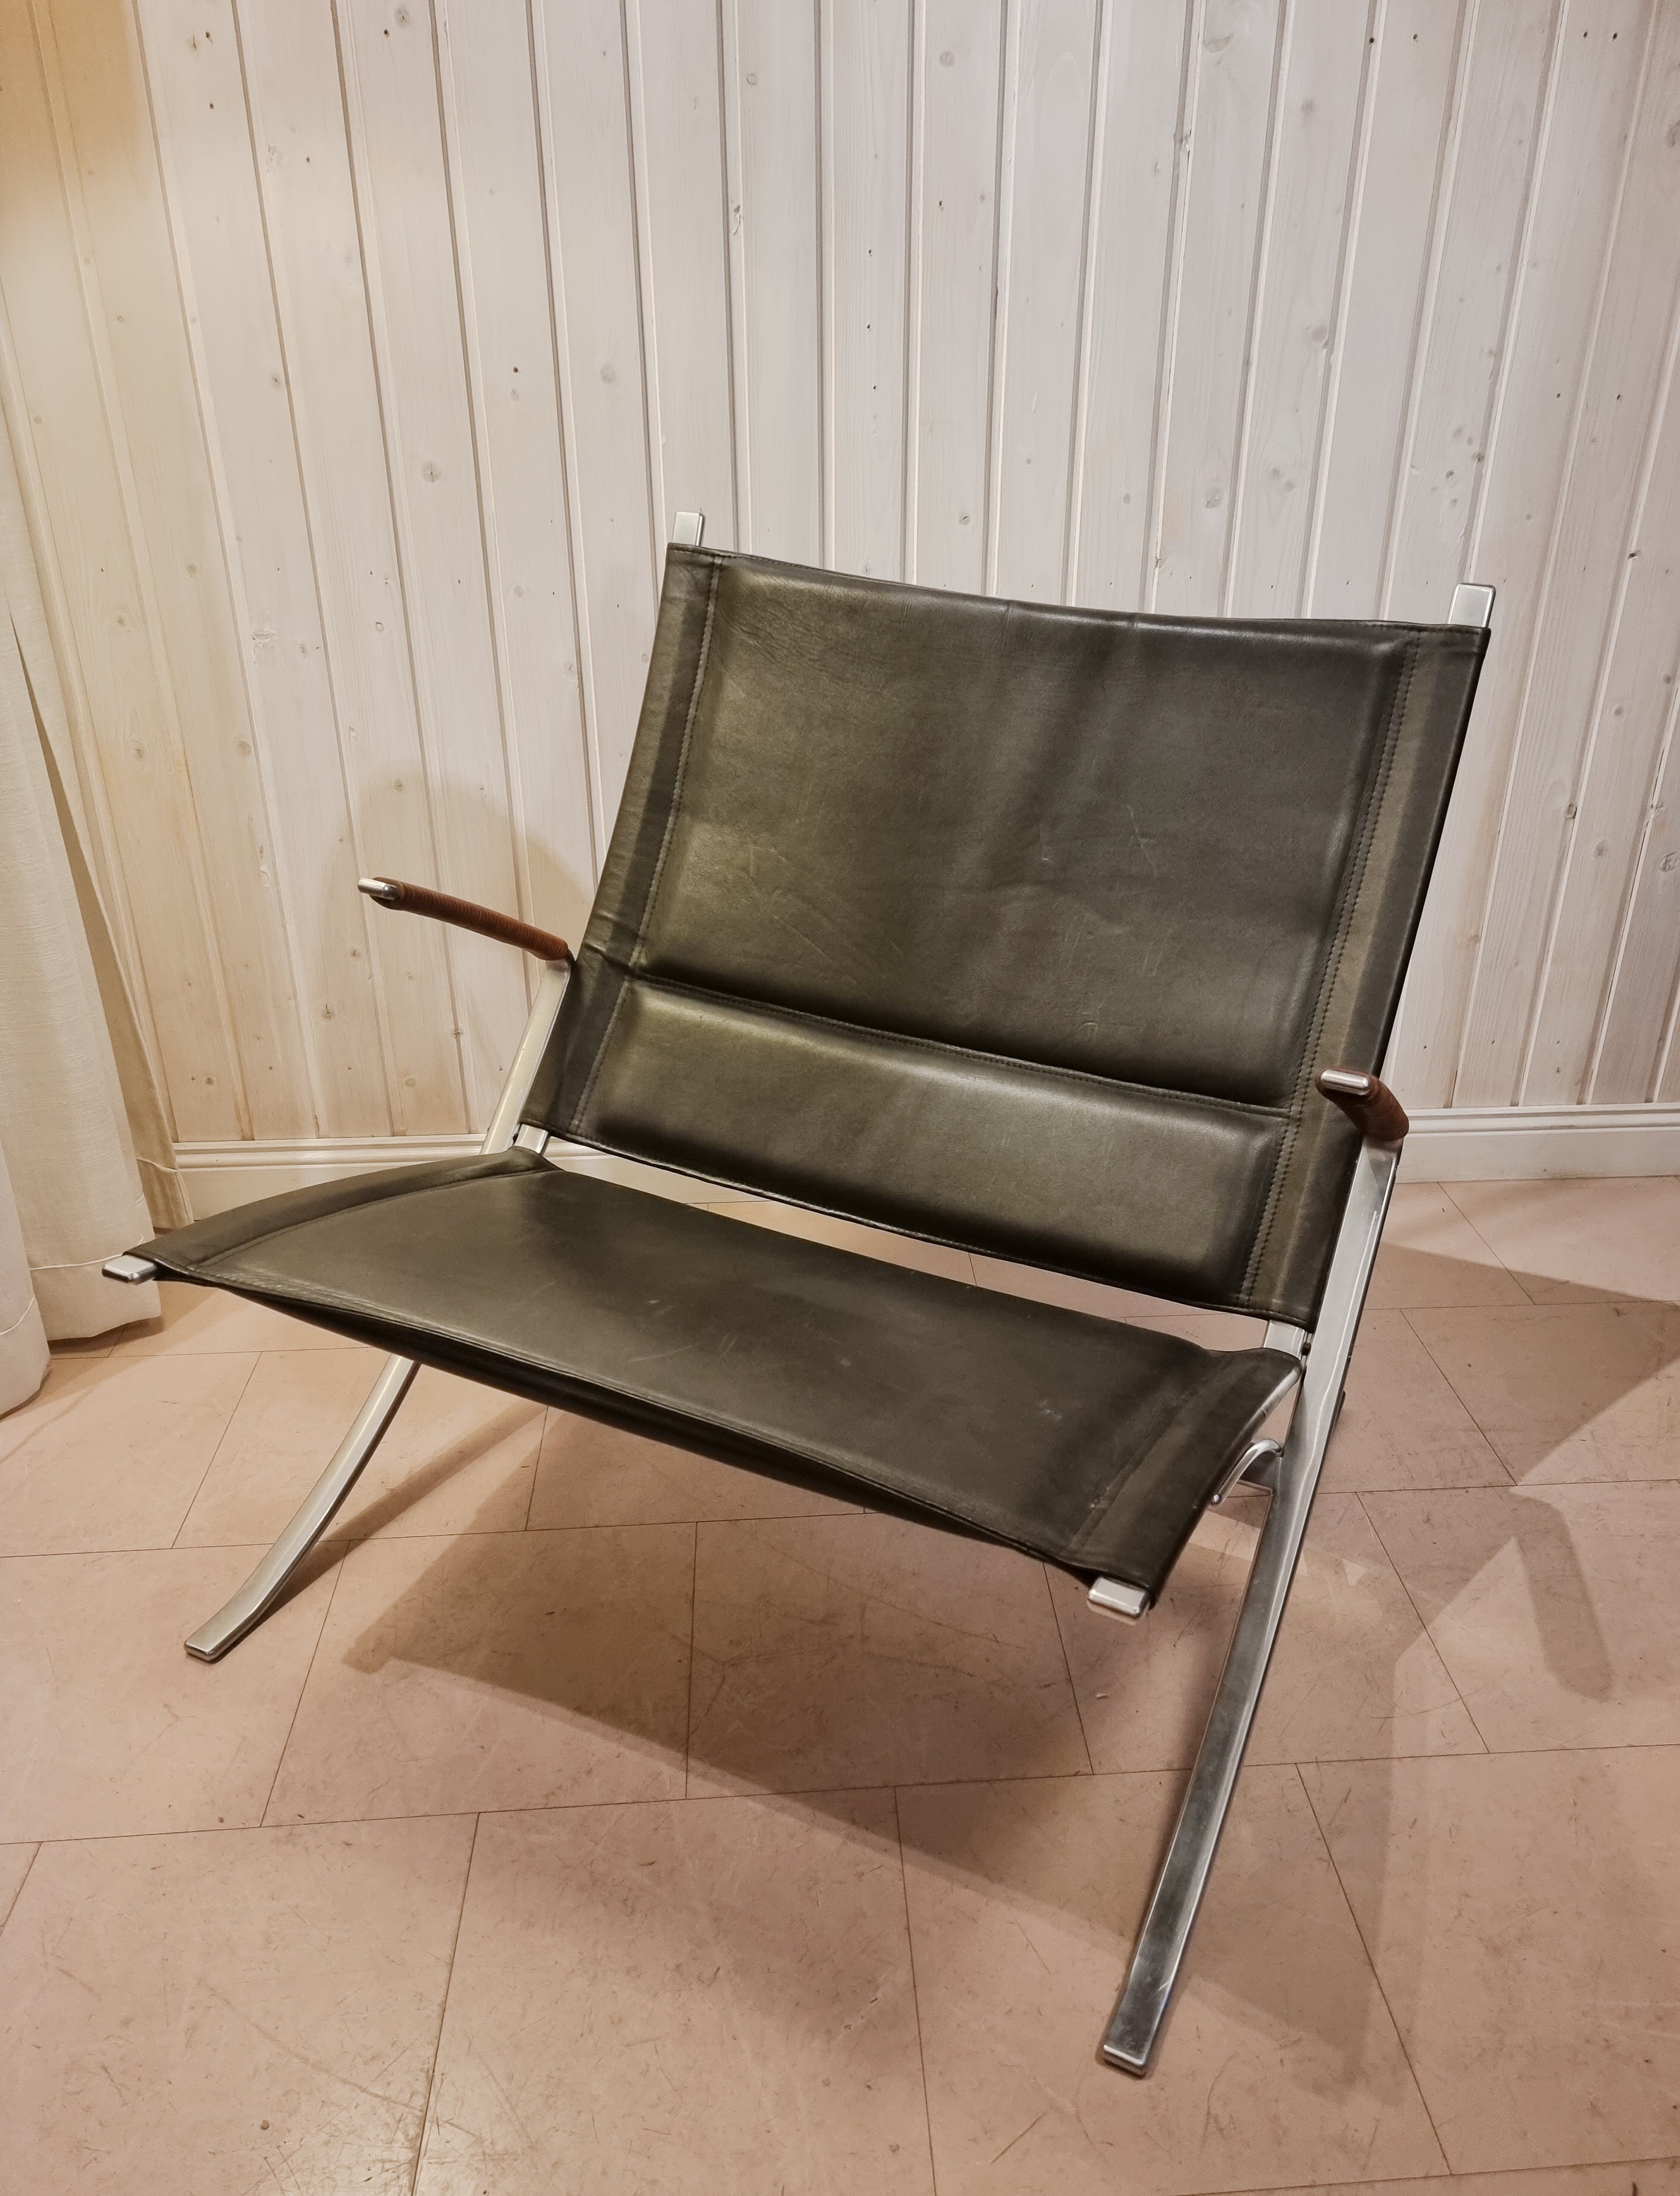 A rare lounge chair in steel, black leather and arms wrapped with brown leather cord. Designed by Preben Fabricius & Jørgen Kastholm, FK82 / X-chair, 1968 for Kill Interional Germany.

In good condition, signs of age and wear.

Alfred Kill